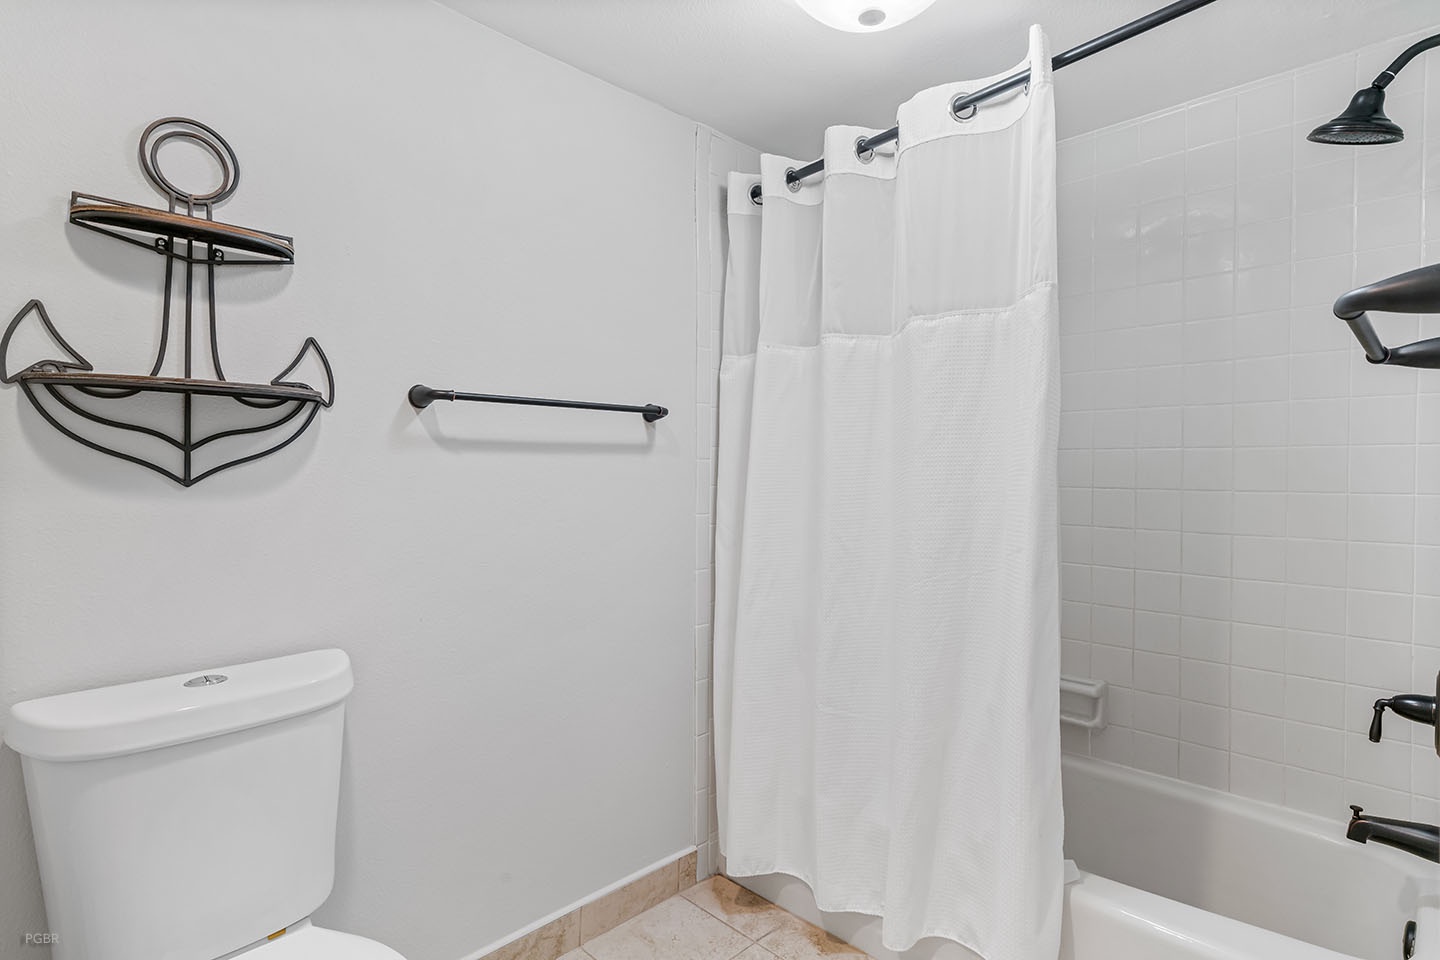 The Master Bathroom has a tub and shower combo.